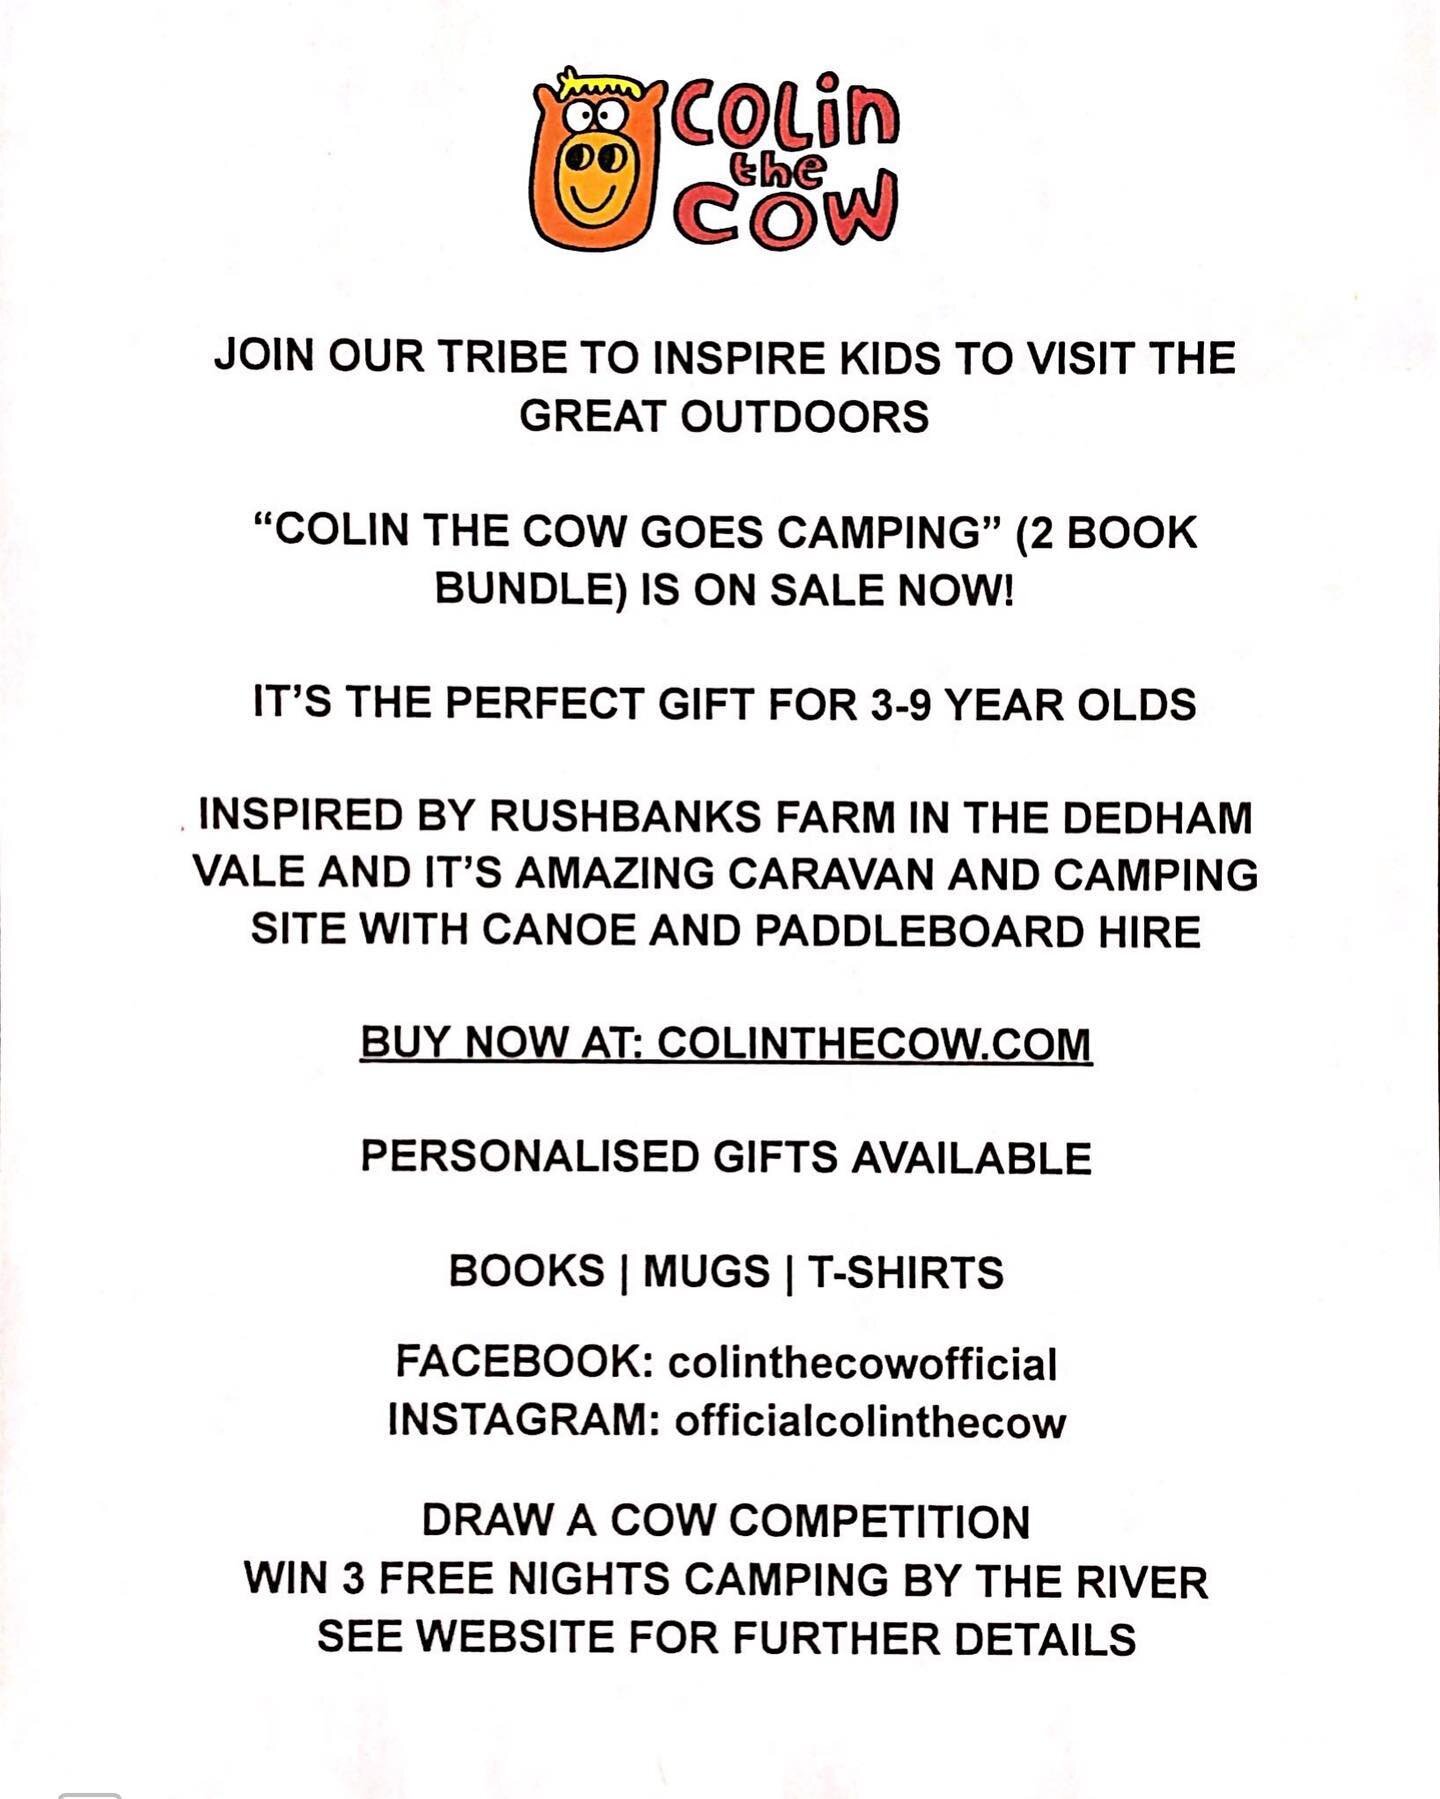 Here are the &ldquo;Colin the Cow Goes Camping&rdquo; details. The books are suitable and extra fun for 3-9 year olds. The &ldquo;draw a competition&rdquo; is also now LIVE!!! Please spread the word about Colin and his competition for all young artis